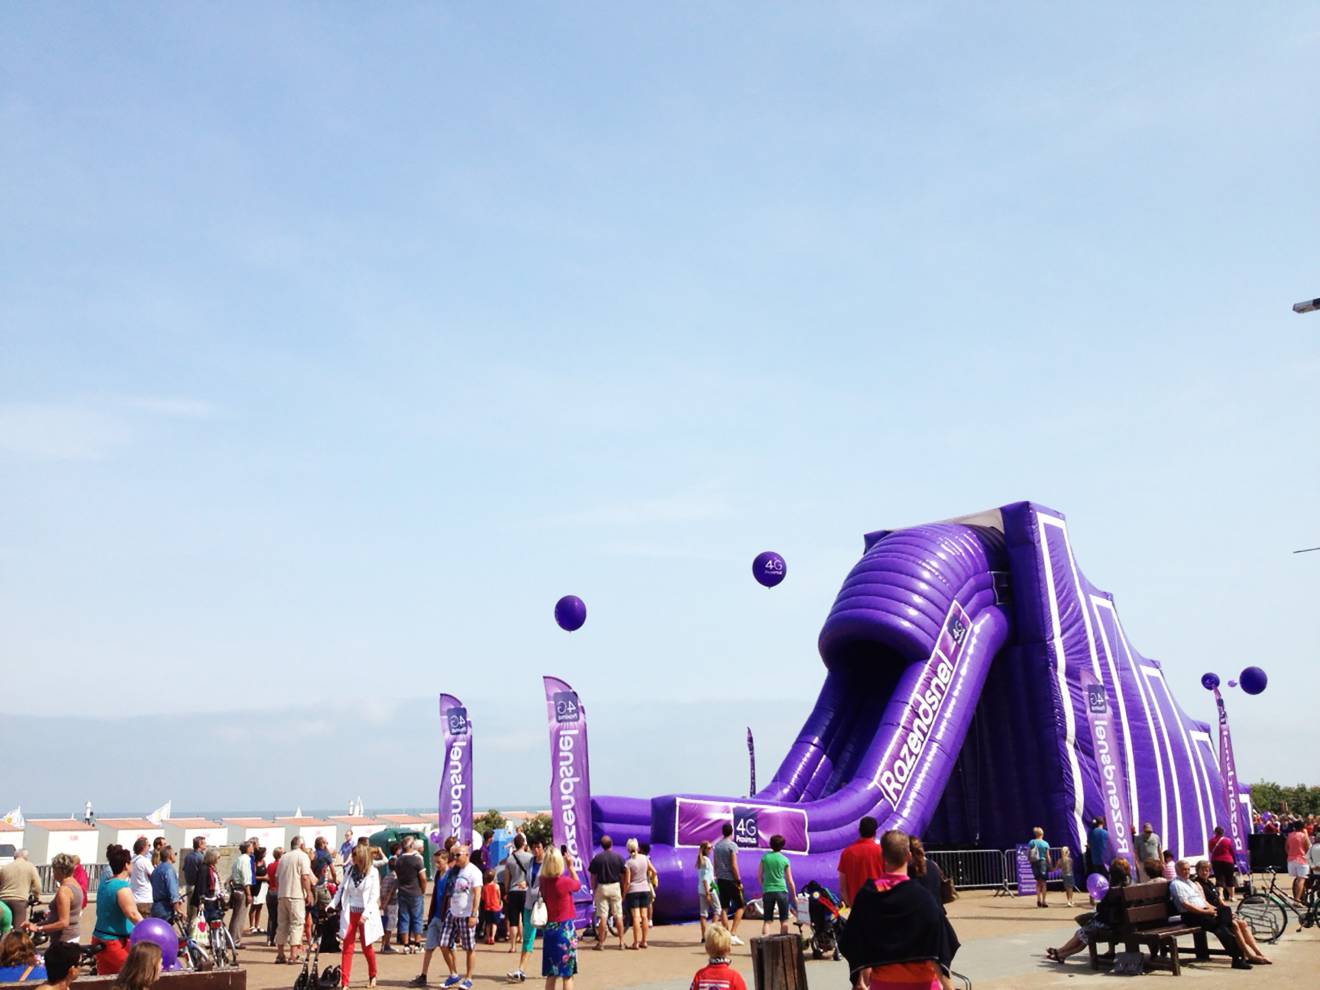 Giant inflatable games Tailor made Inflatable 10 m high and 1400 kg heavy silde with climbing steps Proximus branded made for Demonstr8 agency X-Treme Creations